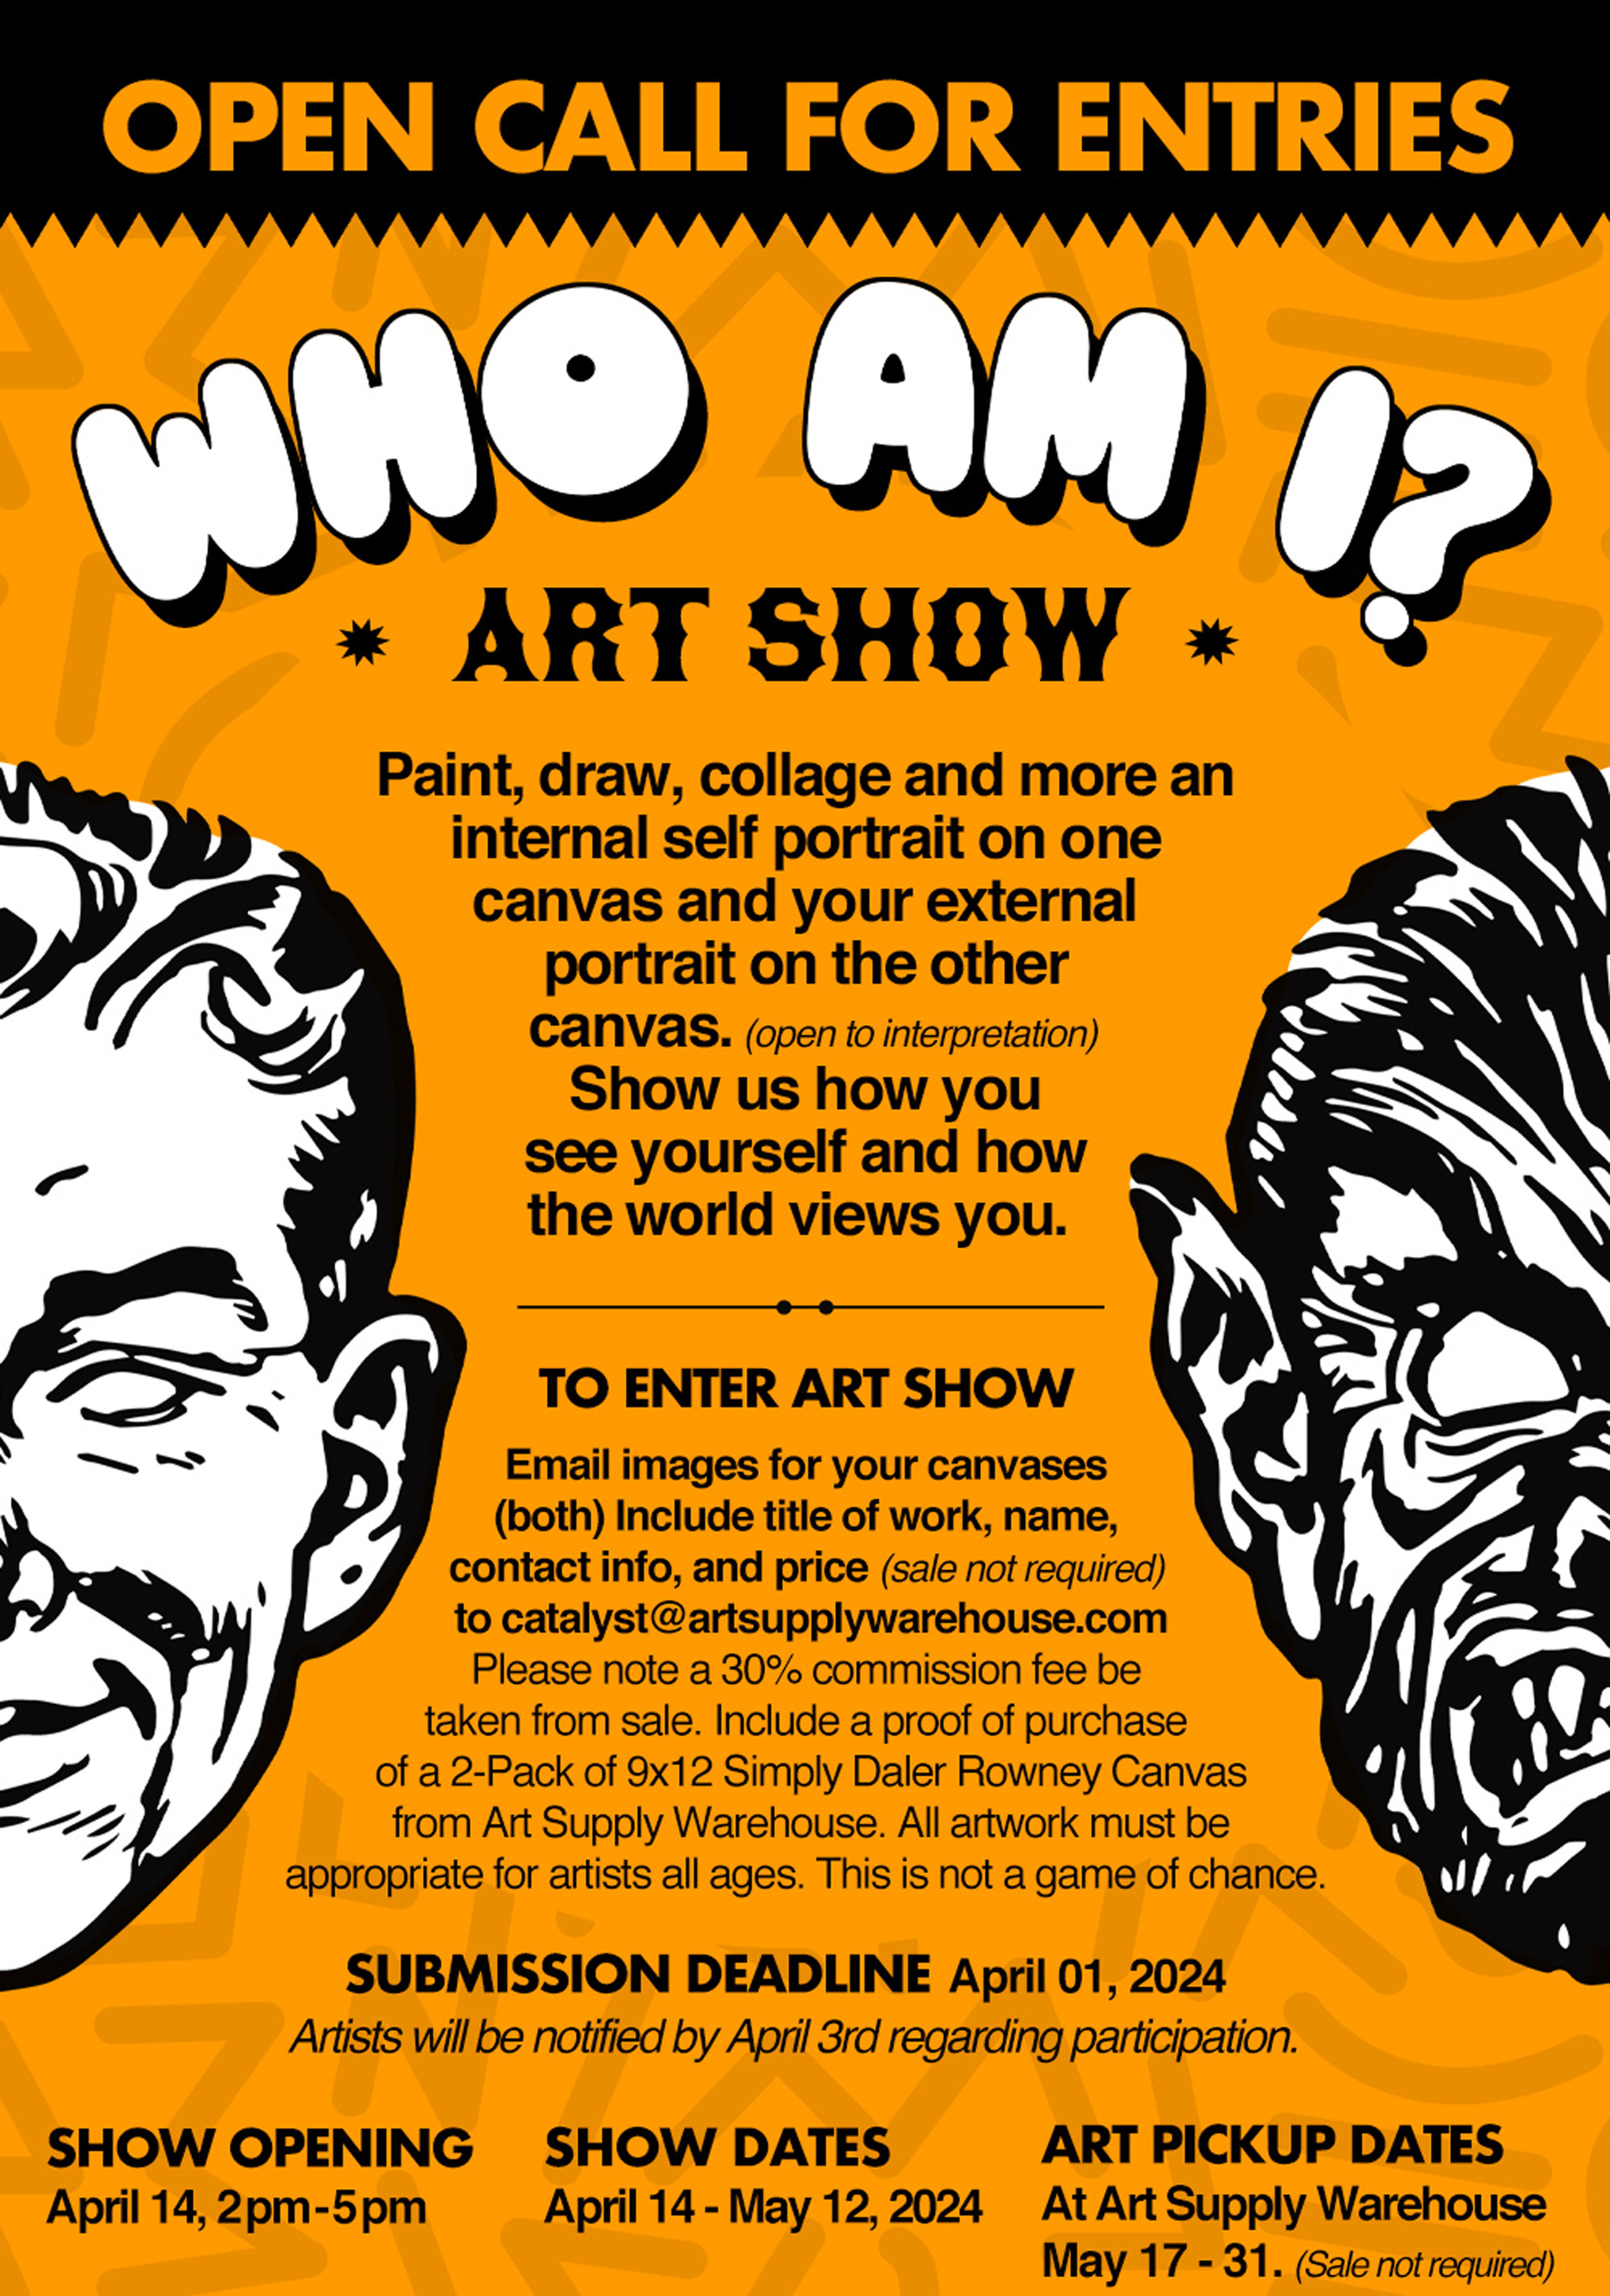 Open Call For Entries! Who Am I? Art Show. Paint, draw, collage and more an internal self portrait on one canvas and your external portrait on the other canvas (open to interpretation). Show us how you see yourself and how the world views you. To enter art show: Email images for your canvases (both) Include title of work, name, contact info, and price (sale not required) in body of email. Please note a 30% commission fee be taken from sale. Include a proof of purchase of a 2-Pack of 9x12 Simply Daler Rowney Canvas from Art Supply Warehouse. All artwork must be
      appropriate for artists all ages. This is not a game of chance. Submission deadline: April 1, 2024. Artists will be notified by April 3rd regarding participation. Show Opening April 14, 2pm to 5pm. Show Dates April 14 to May 12, 2024. Art Pickup Dates at Art Supply Warehouse May 17 to 31. (Sale not required)